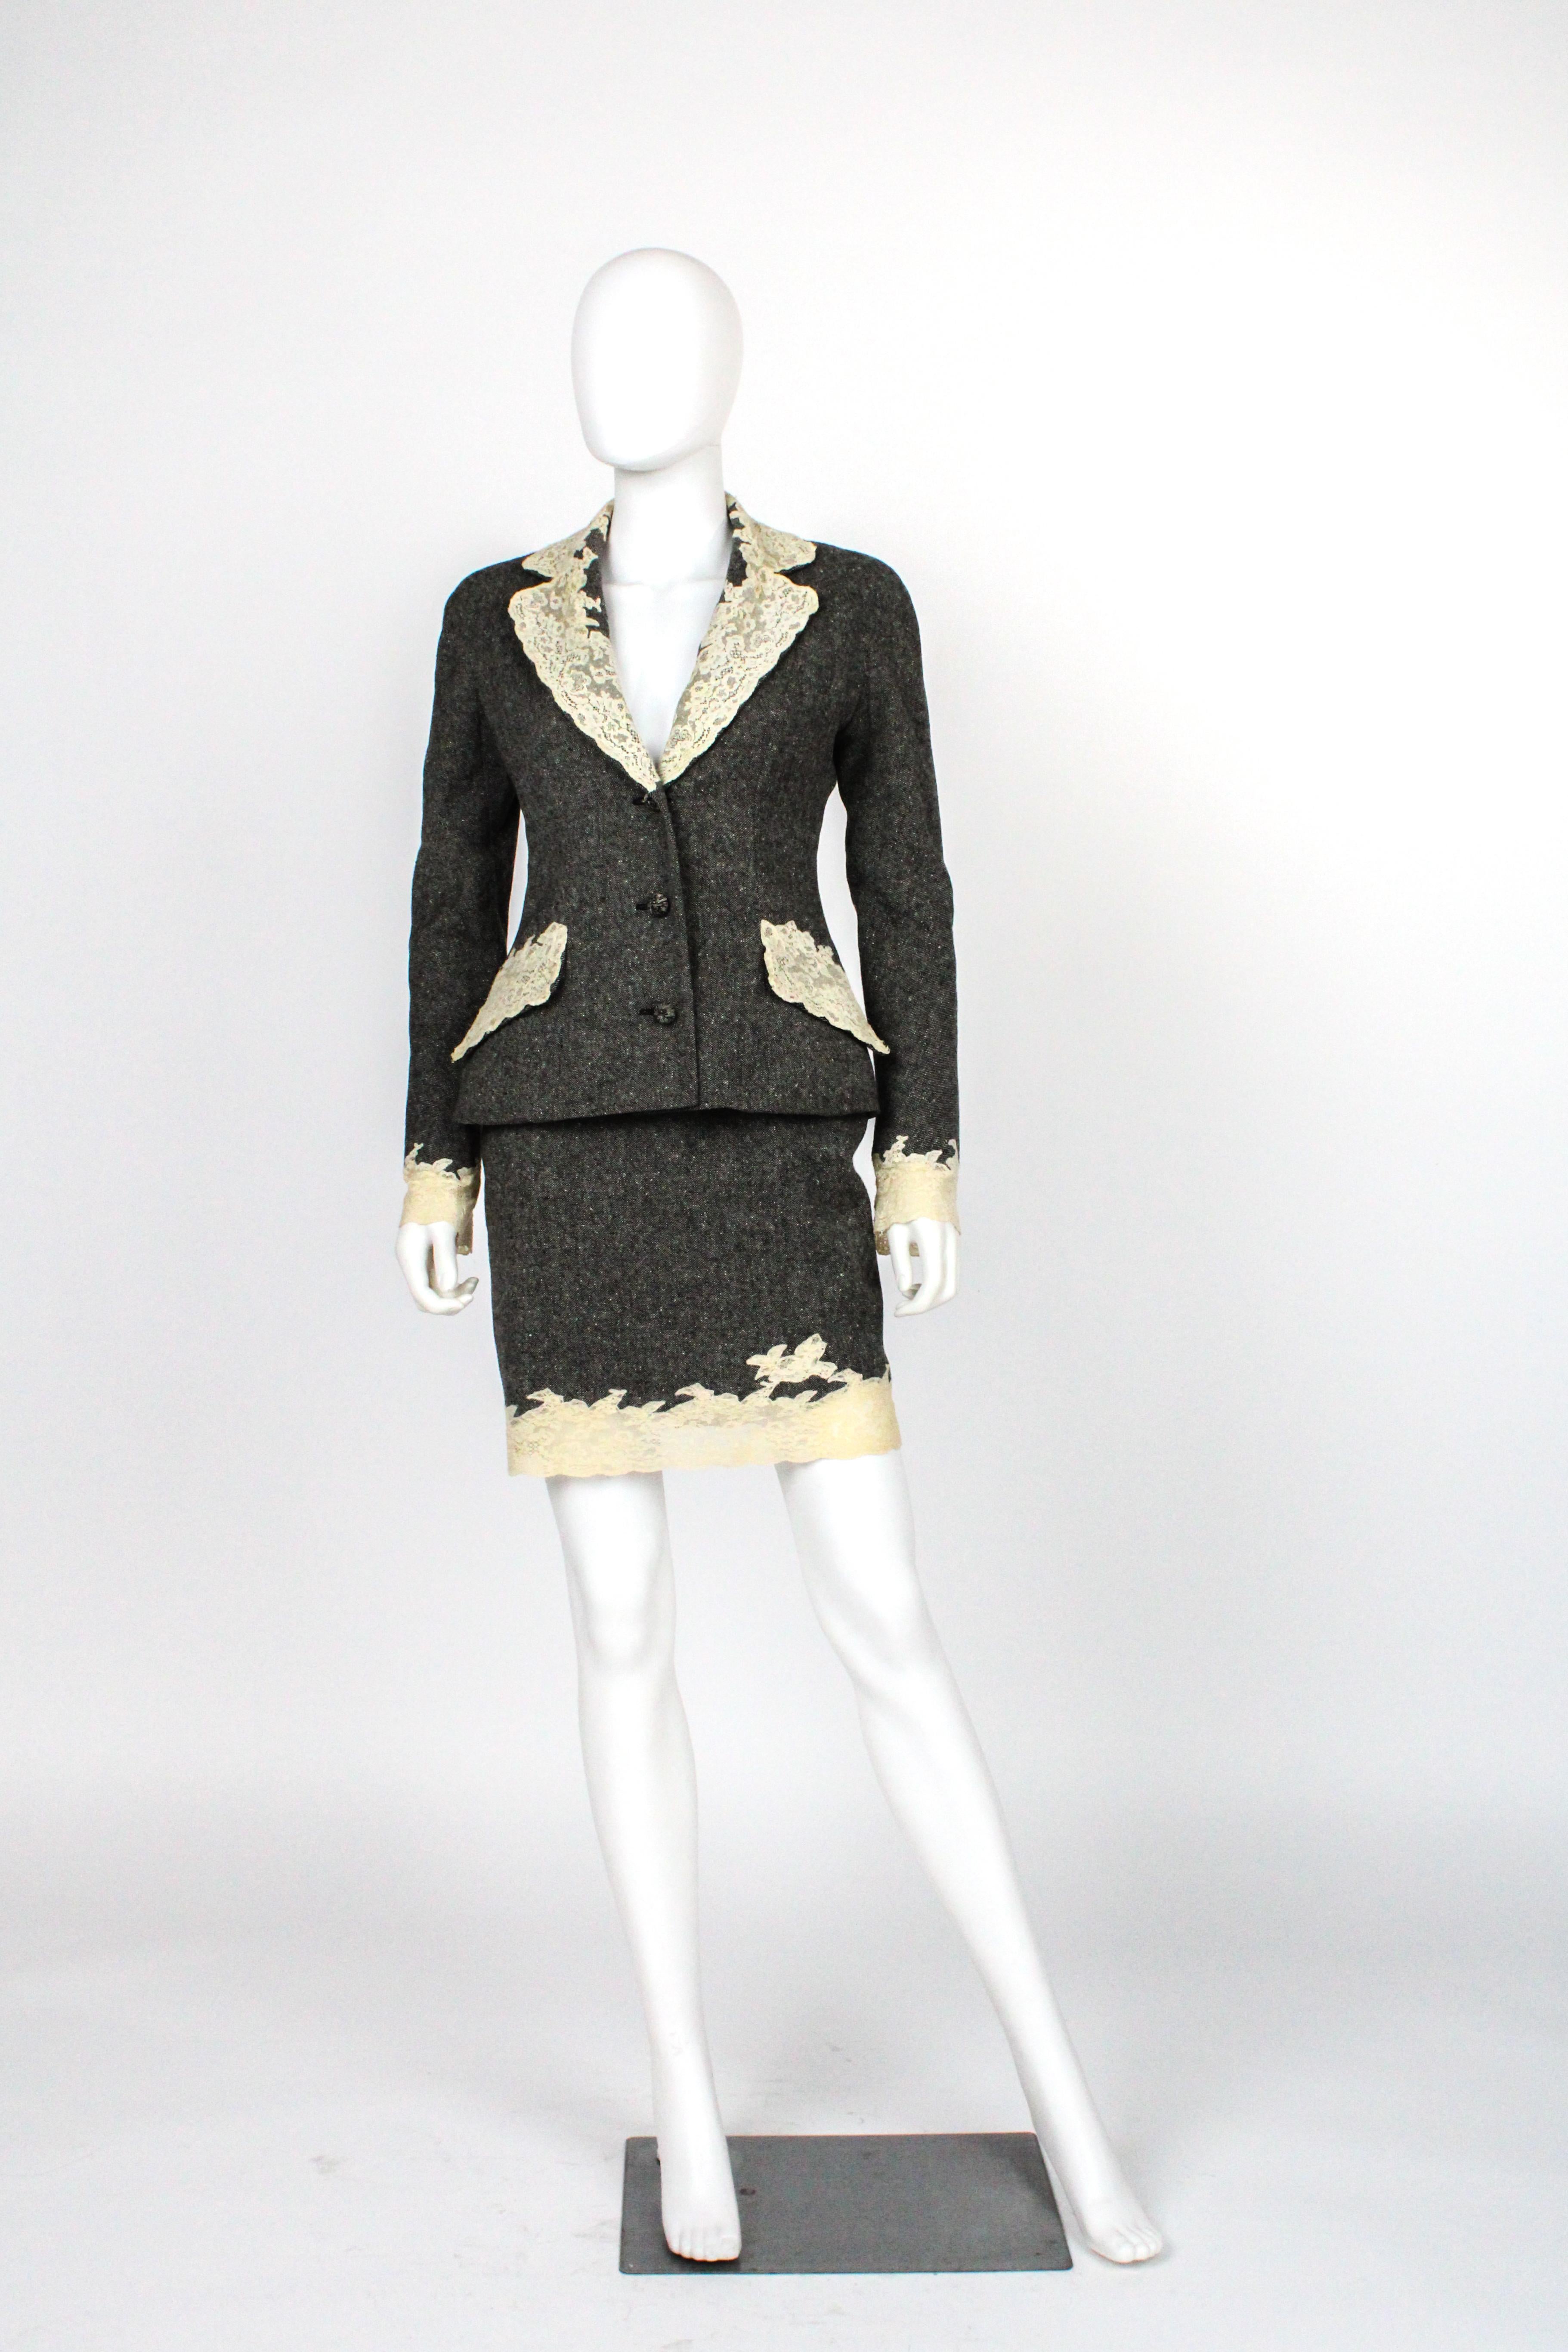 - Guaranteed 100% Authentic.

- Excellent preowned condition.

- Description: grey donegal tweed skirt suit edged in white calais lace. 

- Size: Jacket marked 6 US, Fits 2-4. Chest: 17”, Waist: 14”, L: 26”, arm inseam: 19” and armpit: 7.5”. Skirt